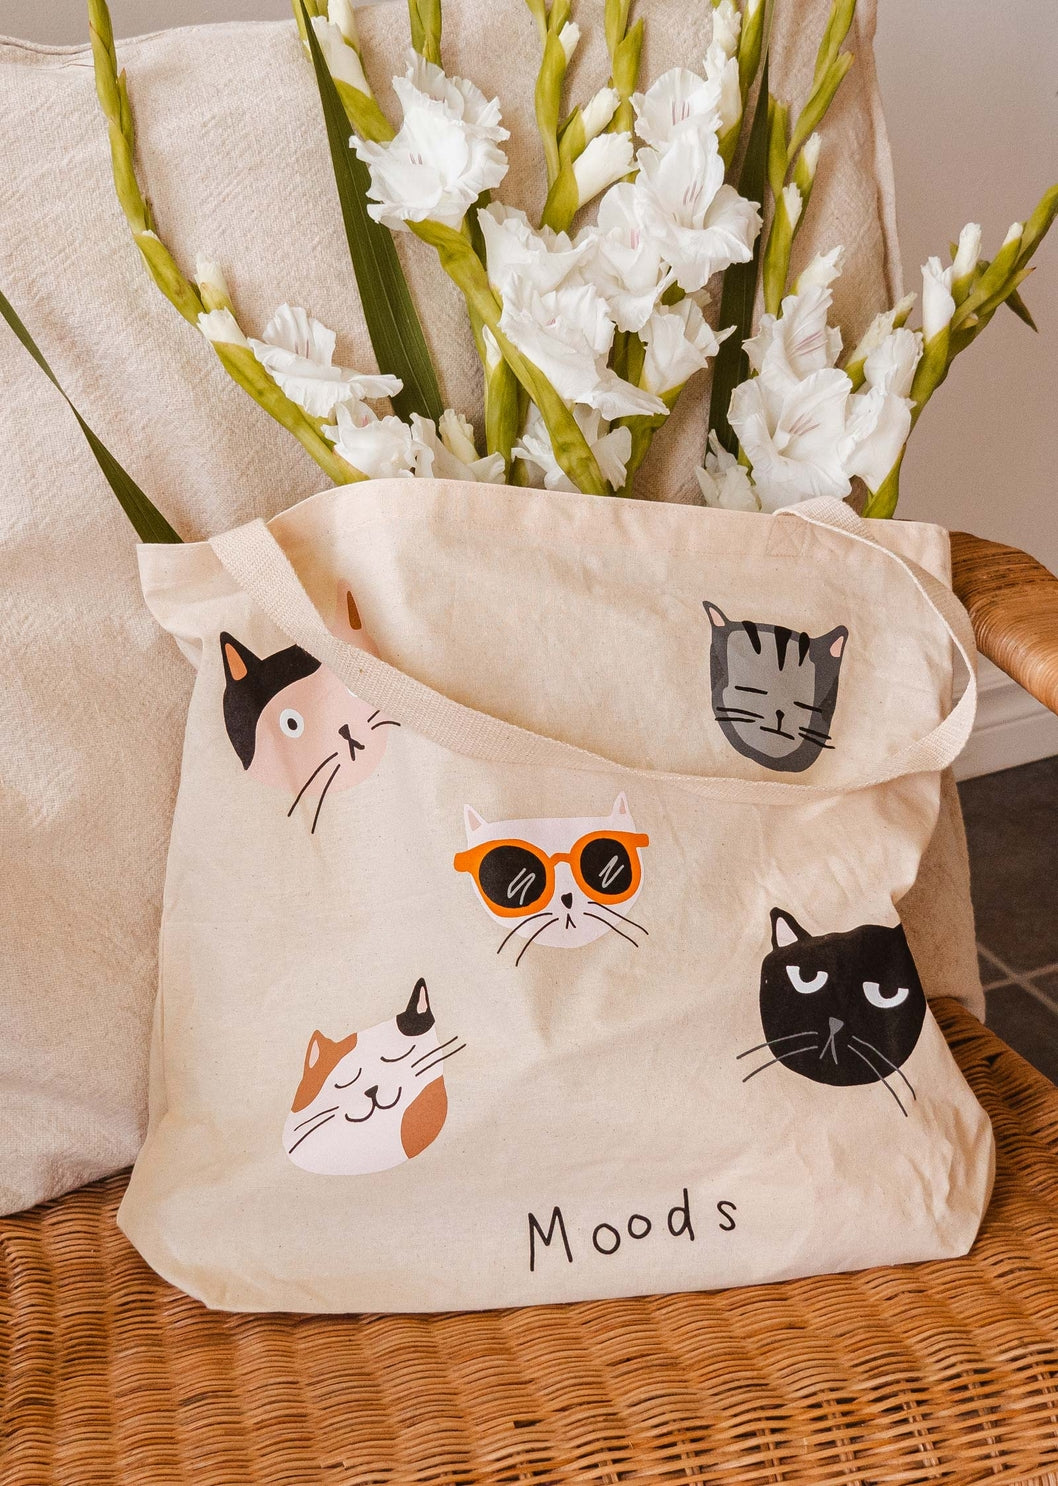 Kitten Moods Tote Bag - Mimi and August